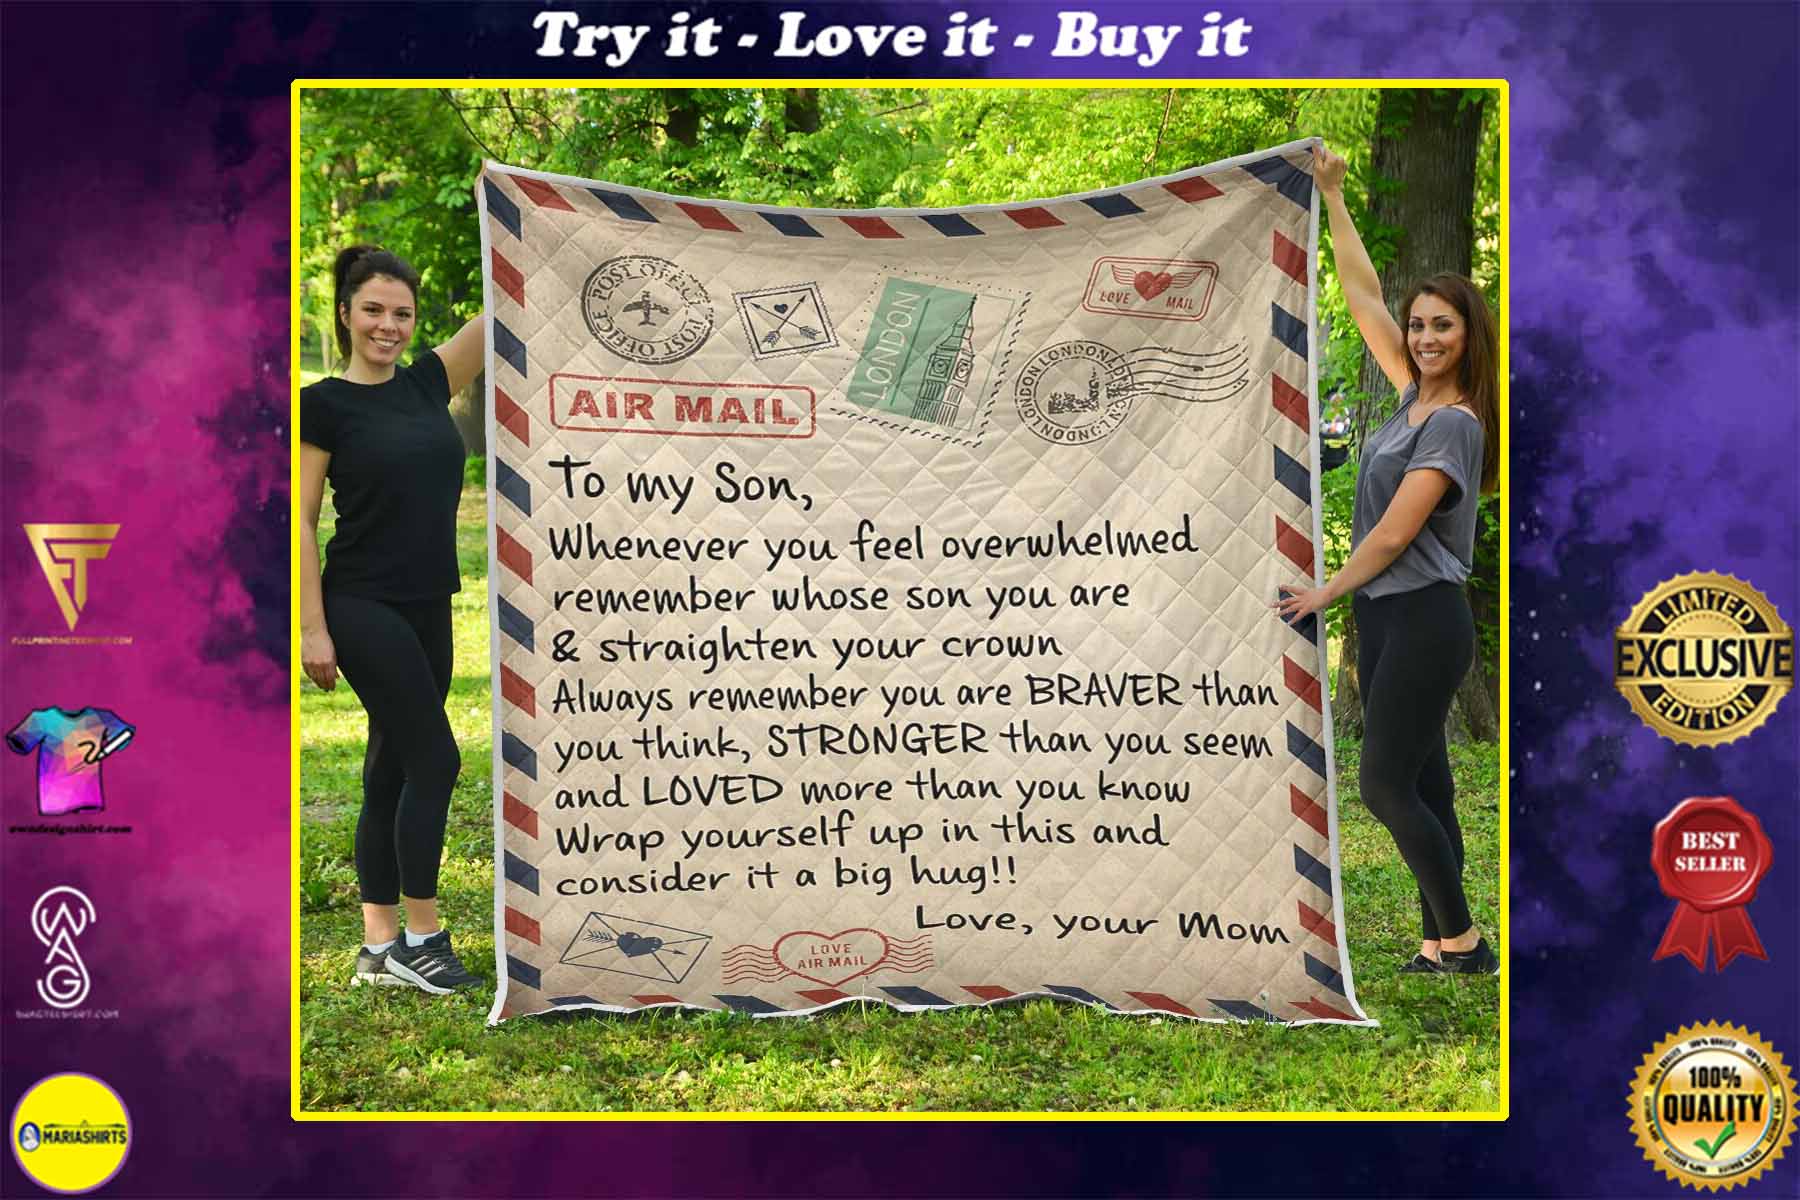 [highest selling] air mail letter to my son always remember you are braver than you think your mom quilt – maria